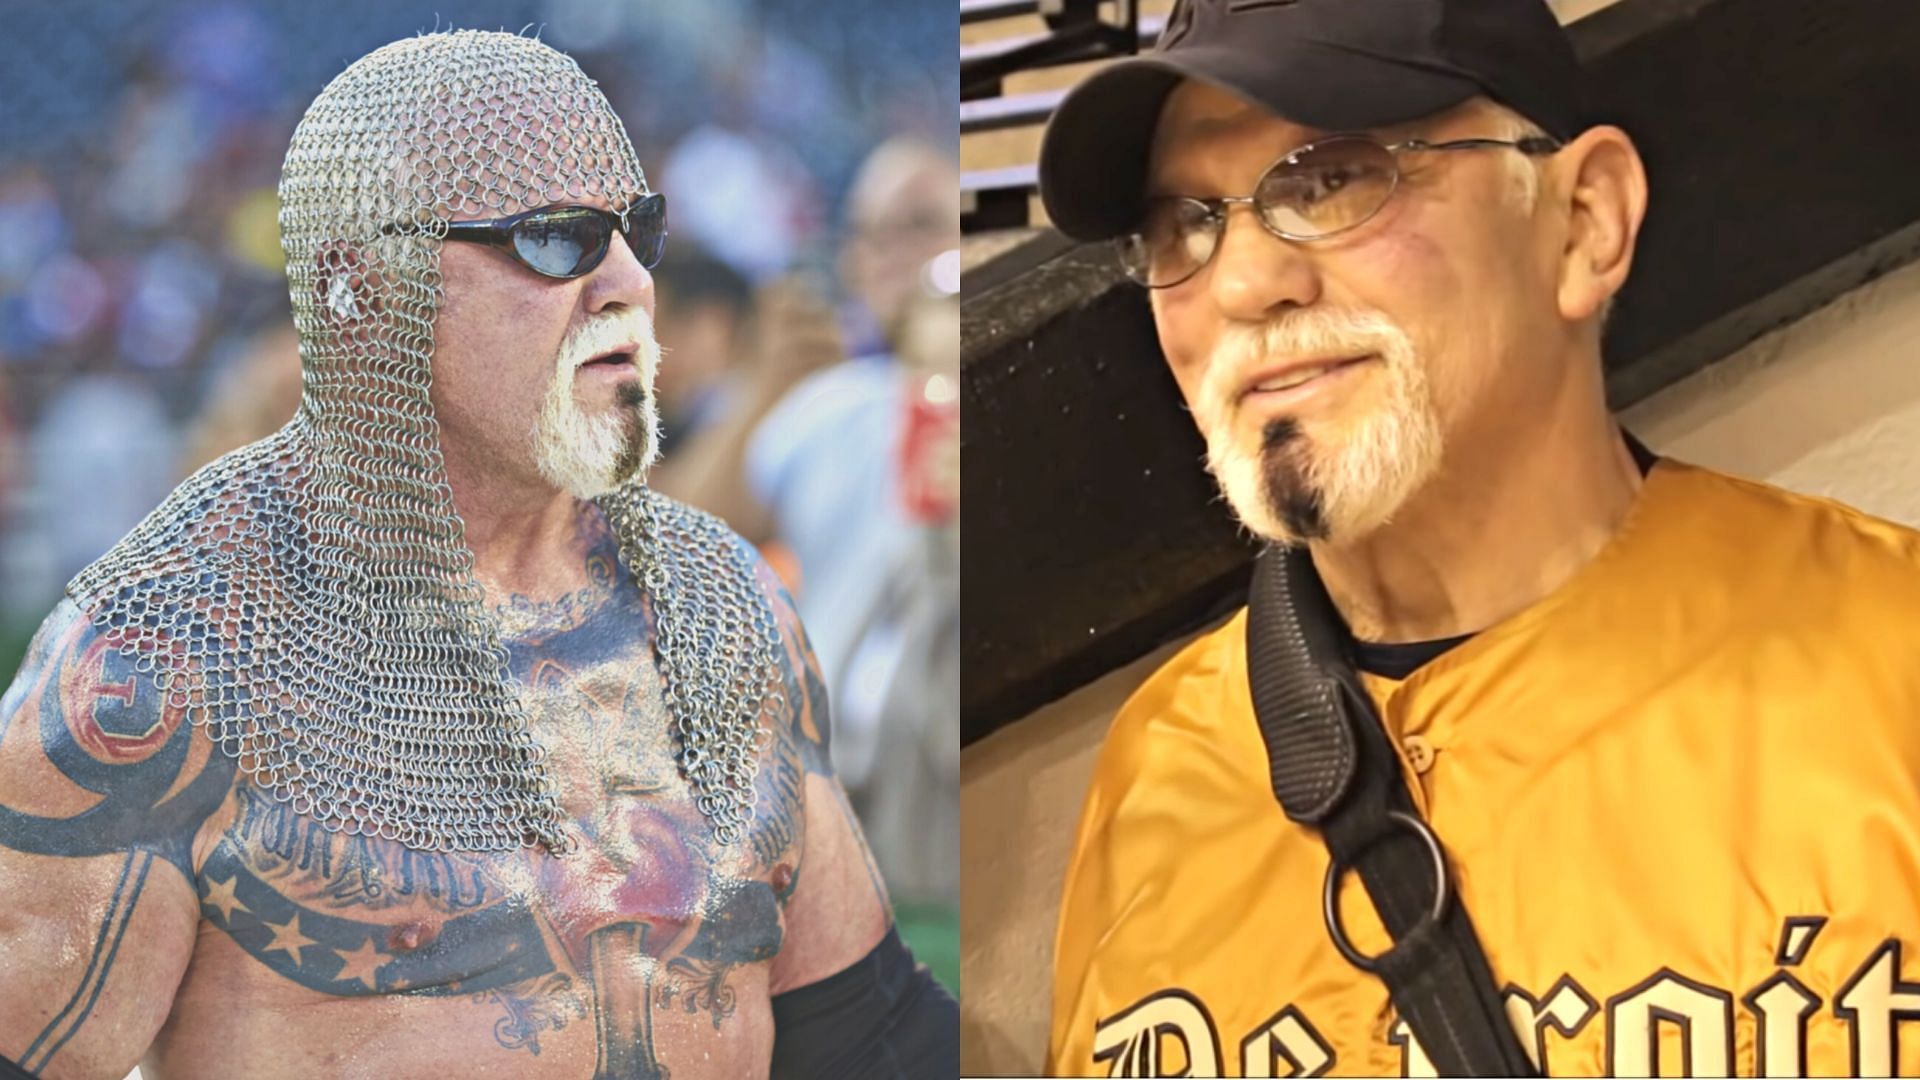 The legendary Scott Steiner is known to be outspoken.